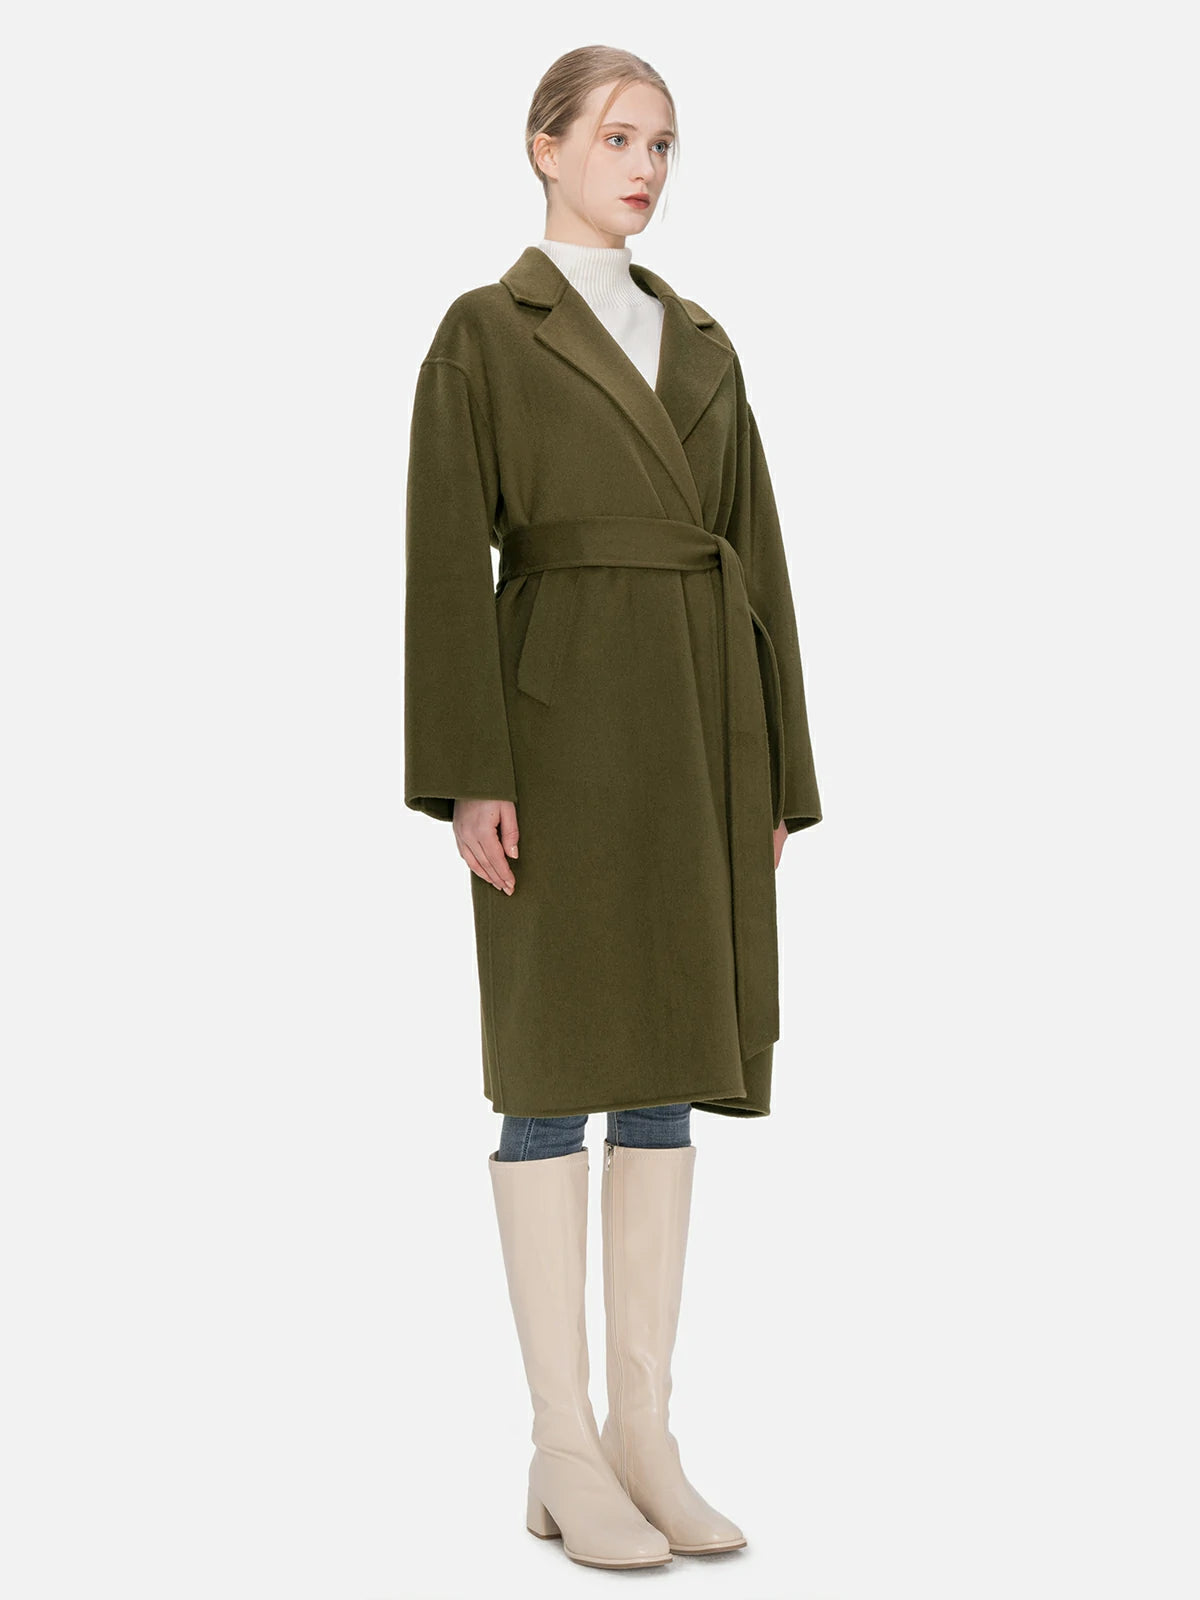 Make a statement with this deep olive green mid-length wool coat, boasting a lapel and belt design, concealed buttons, and a tailored fit that enhances the feminine silhouette.